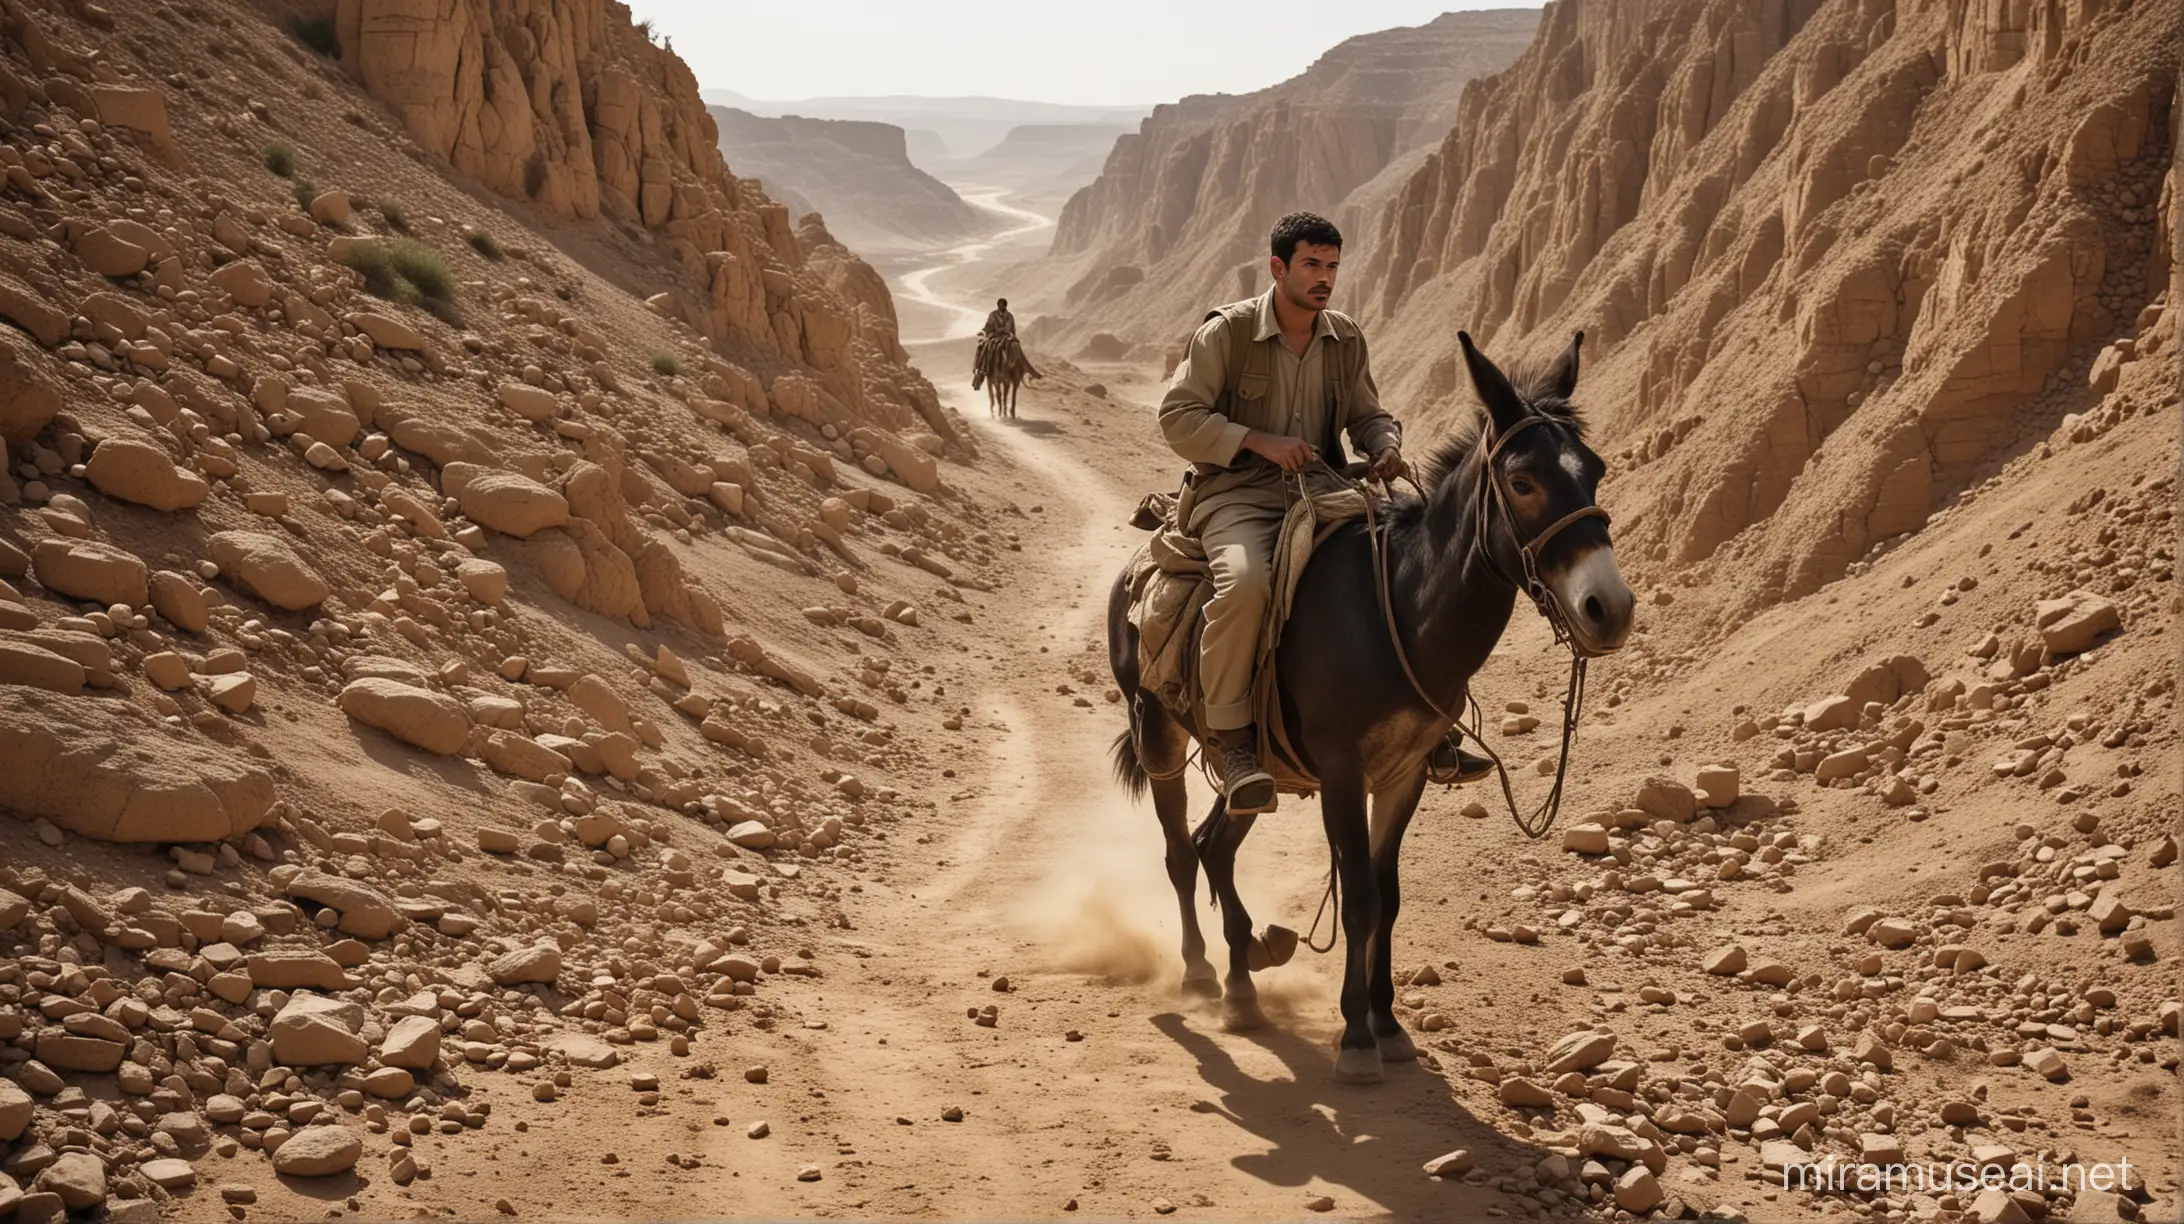 Generate an image depicting a young man riding a donkey through rugged terrain, evoking the escape of Saddam Hussein after a failed assassination attempt in 1959. The man should appear wounded, emphasizing the desperation and danger of his flight.